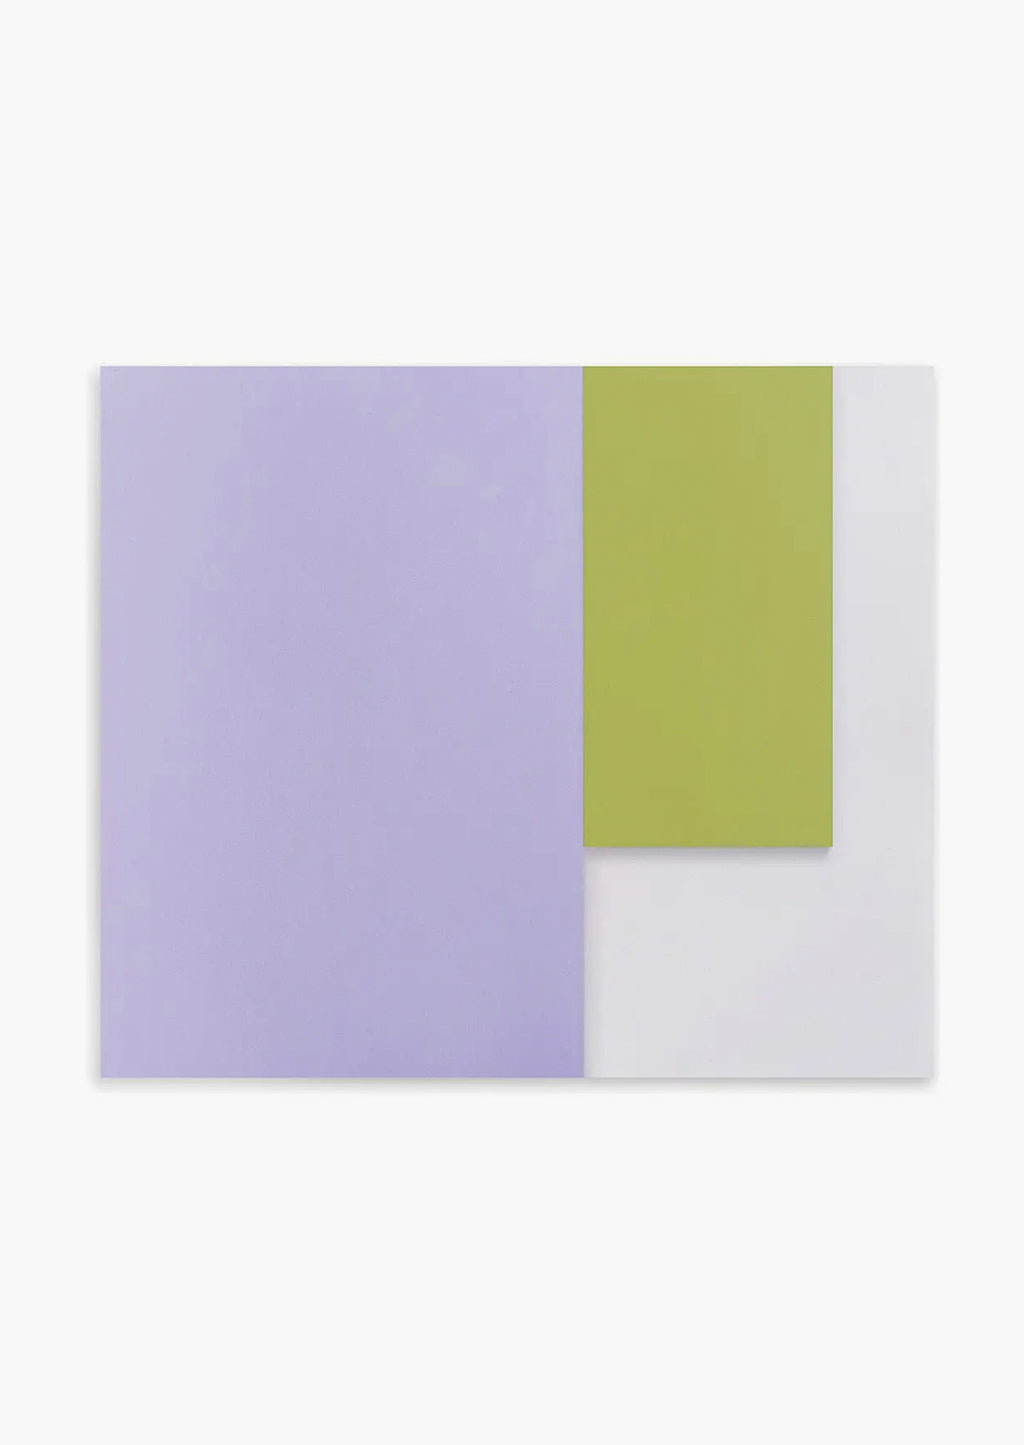 Lavender / White / Lime: A landscape oriented notepad with three separate sized sections in lavender, white and lime green..